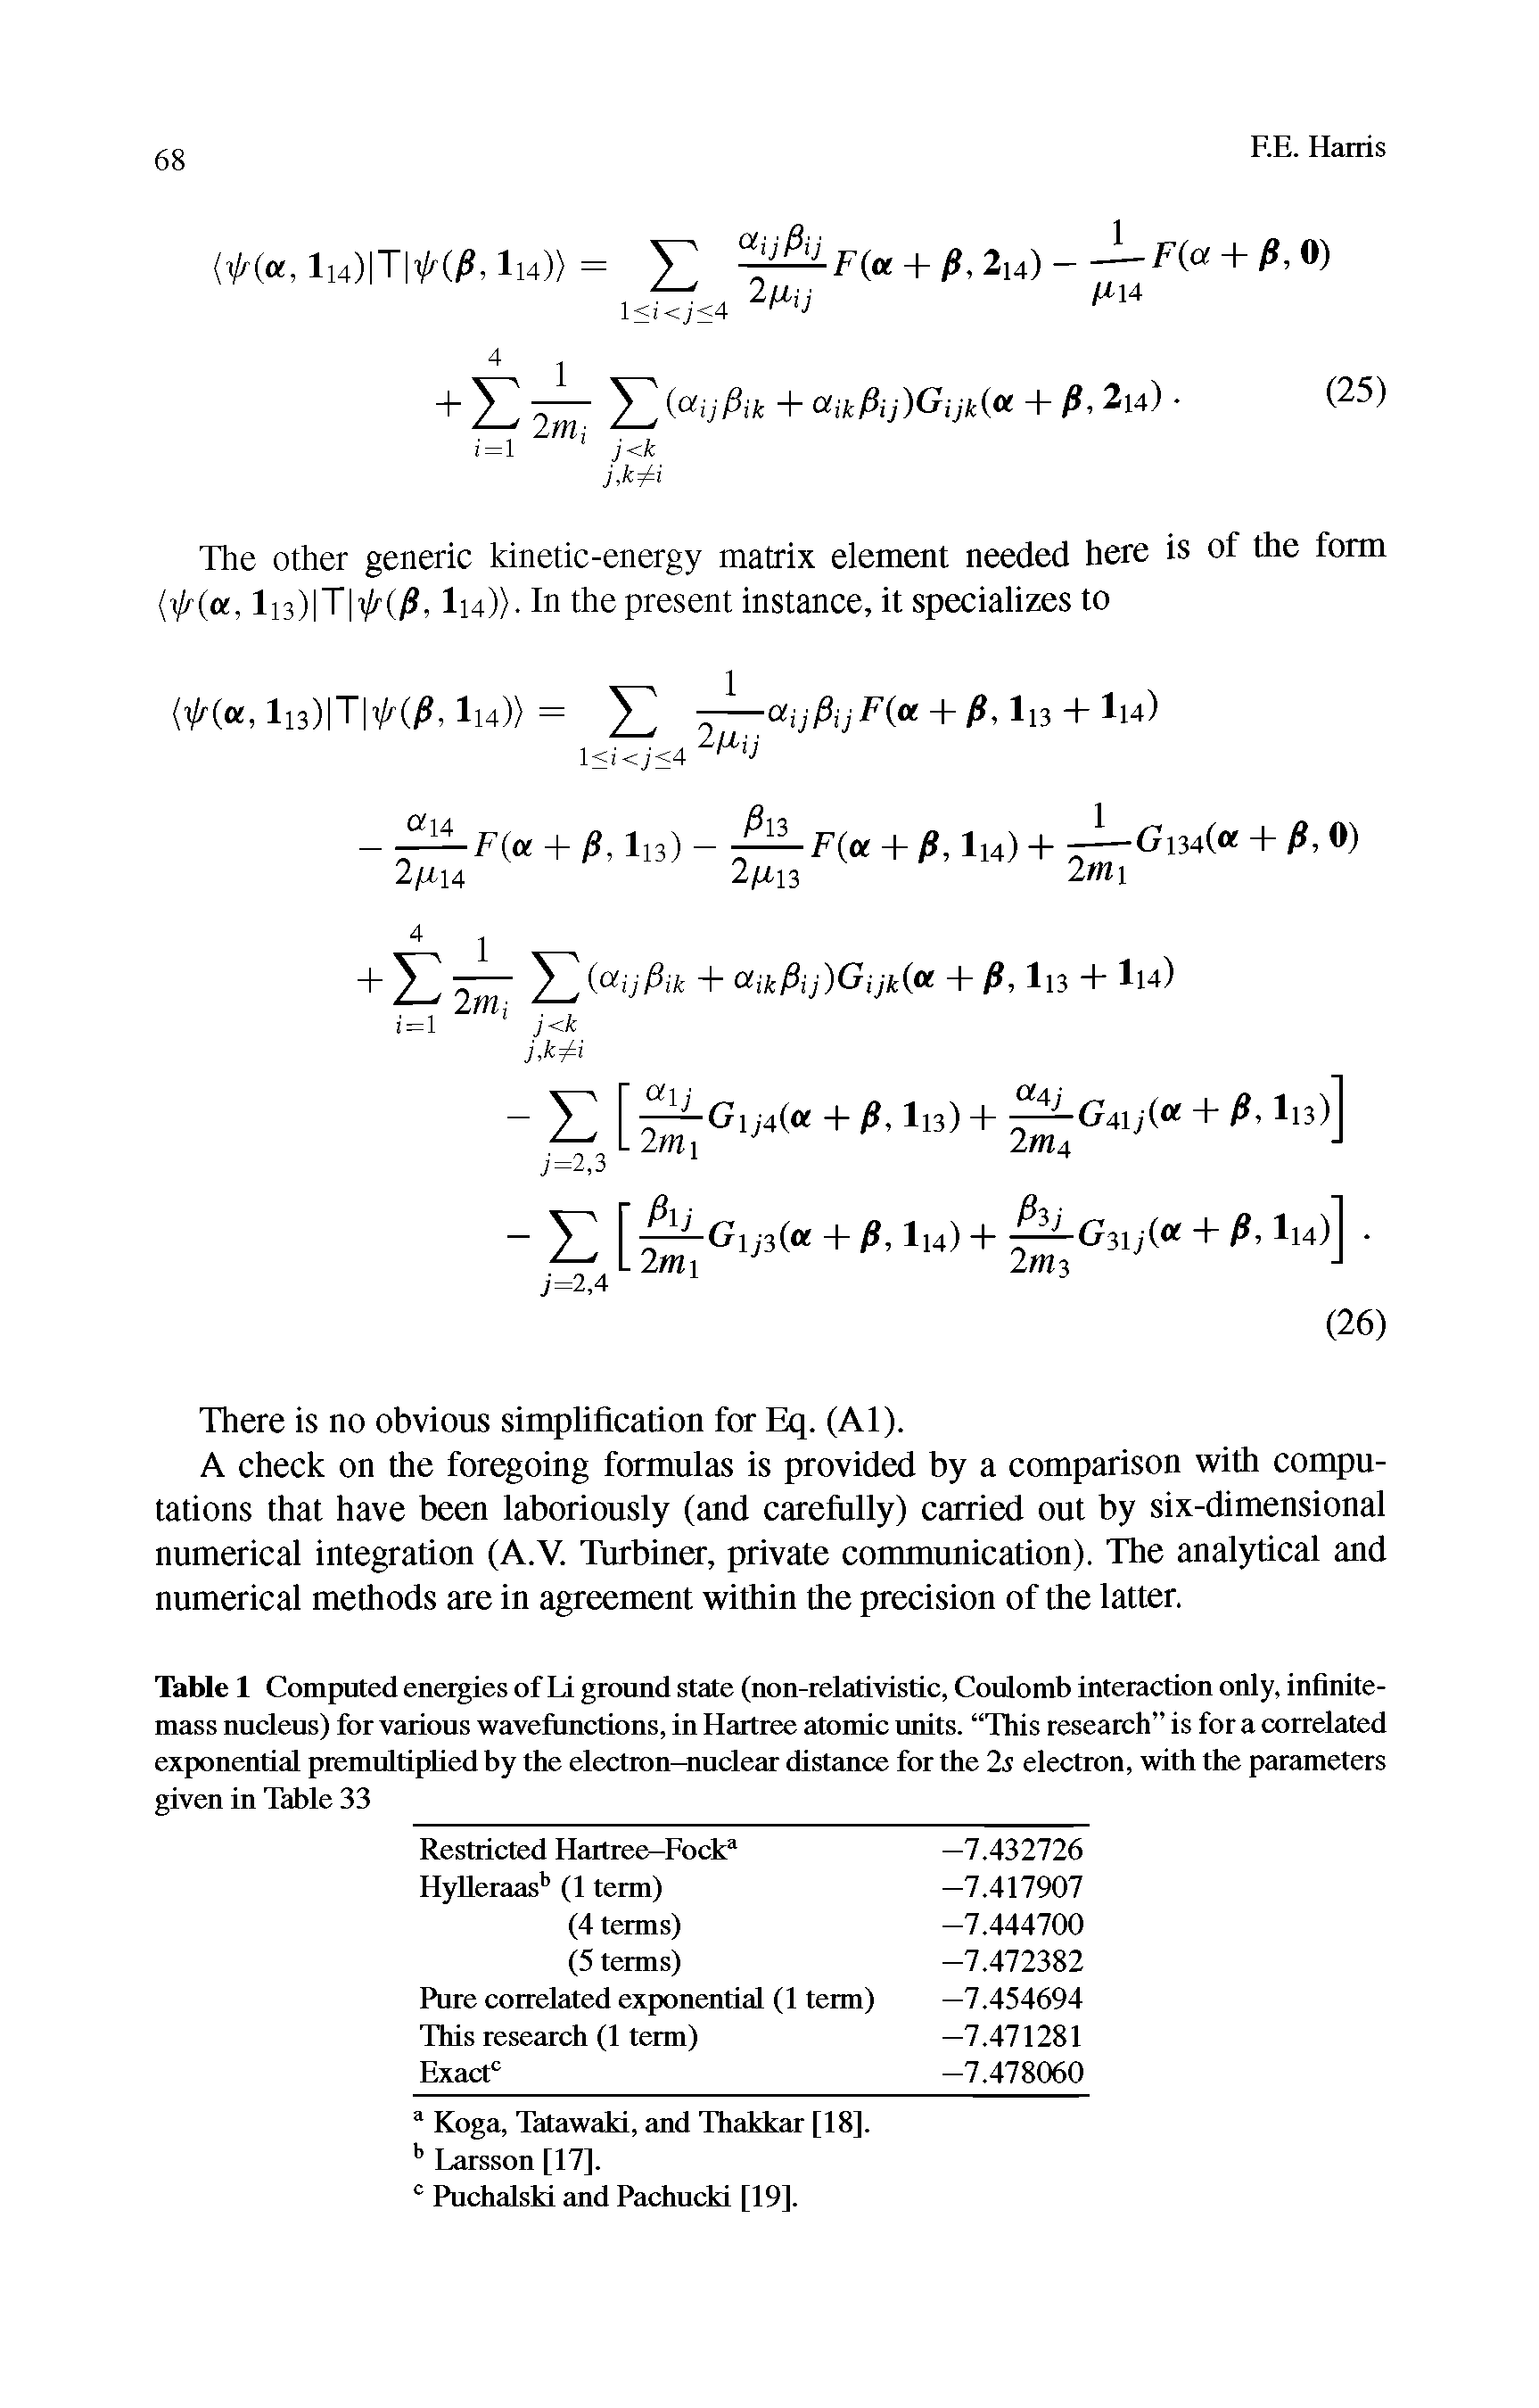 Table 1 Computed energies of Li ground state (non-relativistic, Coulomb interaction only, infinite-mass nucleus) for various wavefunctions, in Hartree atomic units. This research is for a correlated exponential premultiplied by the electron-nuclear distance for the 2s electron, with the parameters given in Table 33...